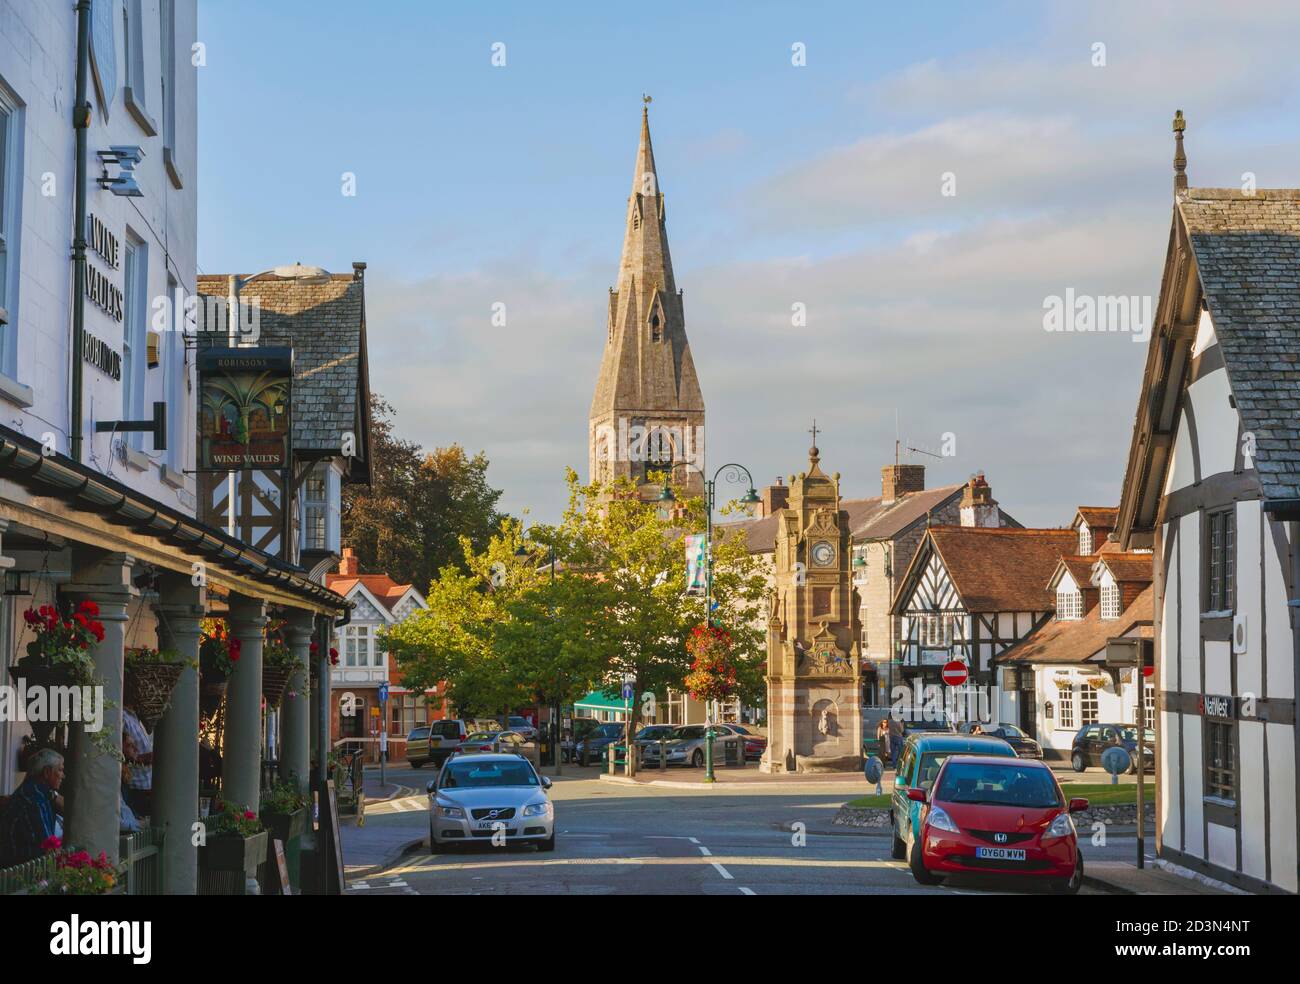 Ruthin, Denbighshire, Wales, United Kingdom.  St Peter's Square and church. Stock Photo